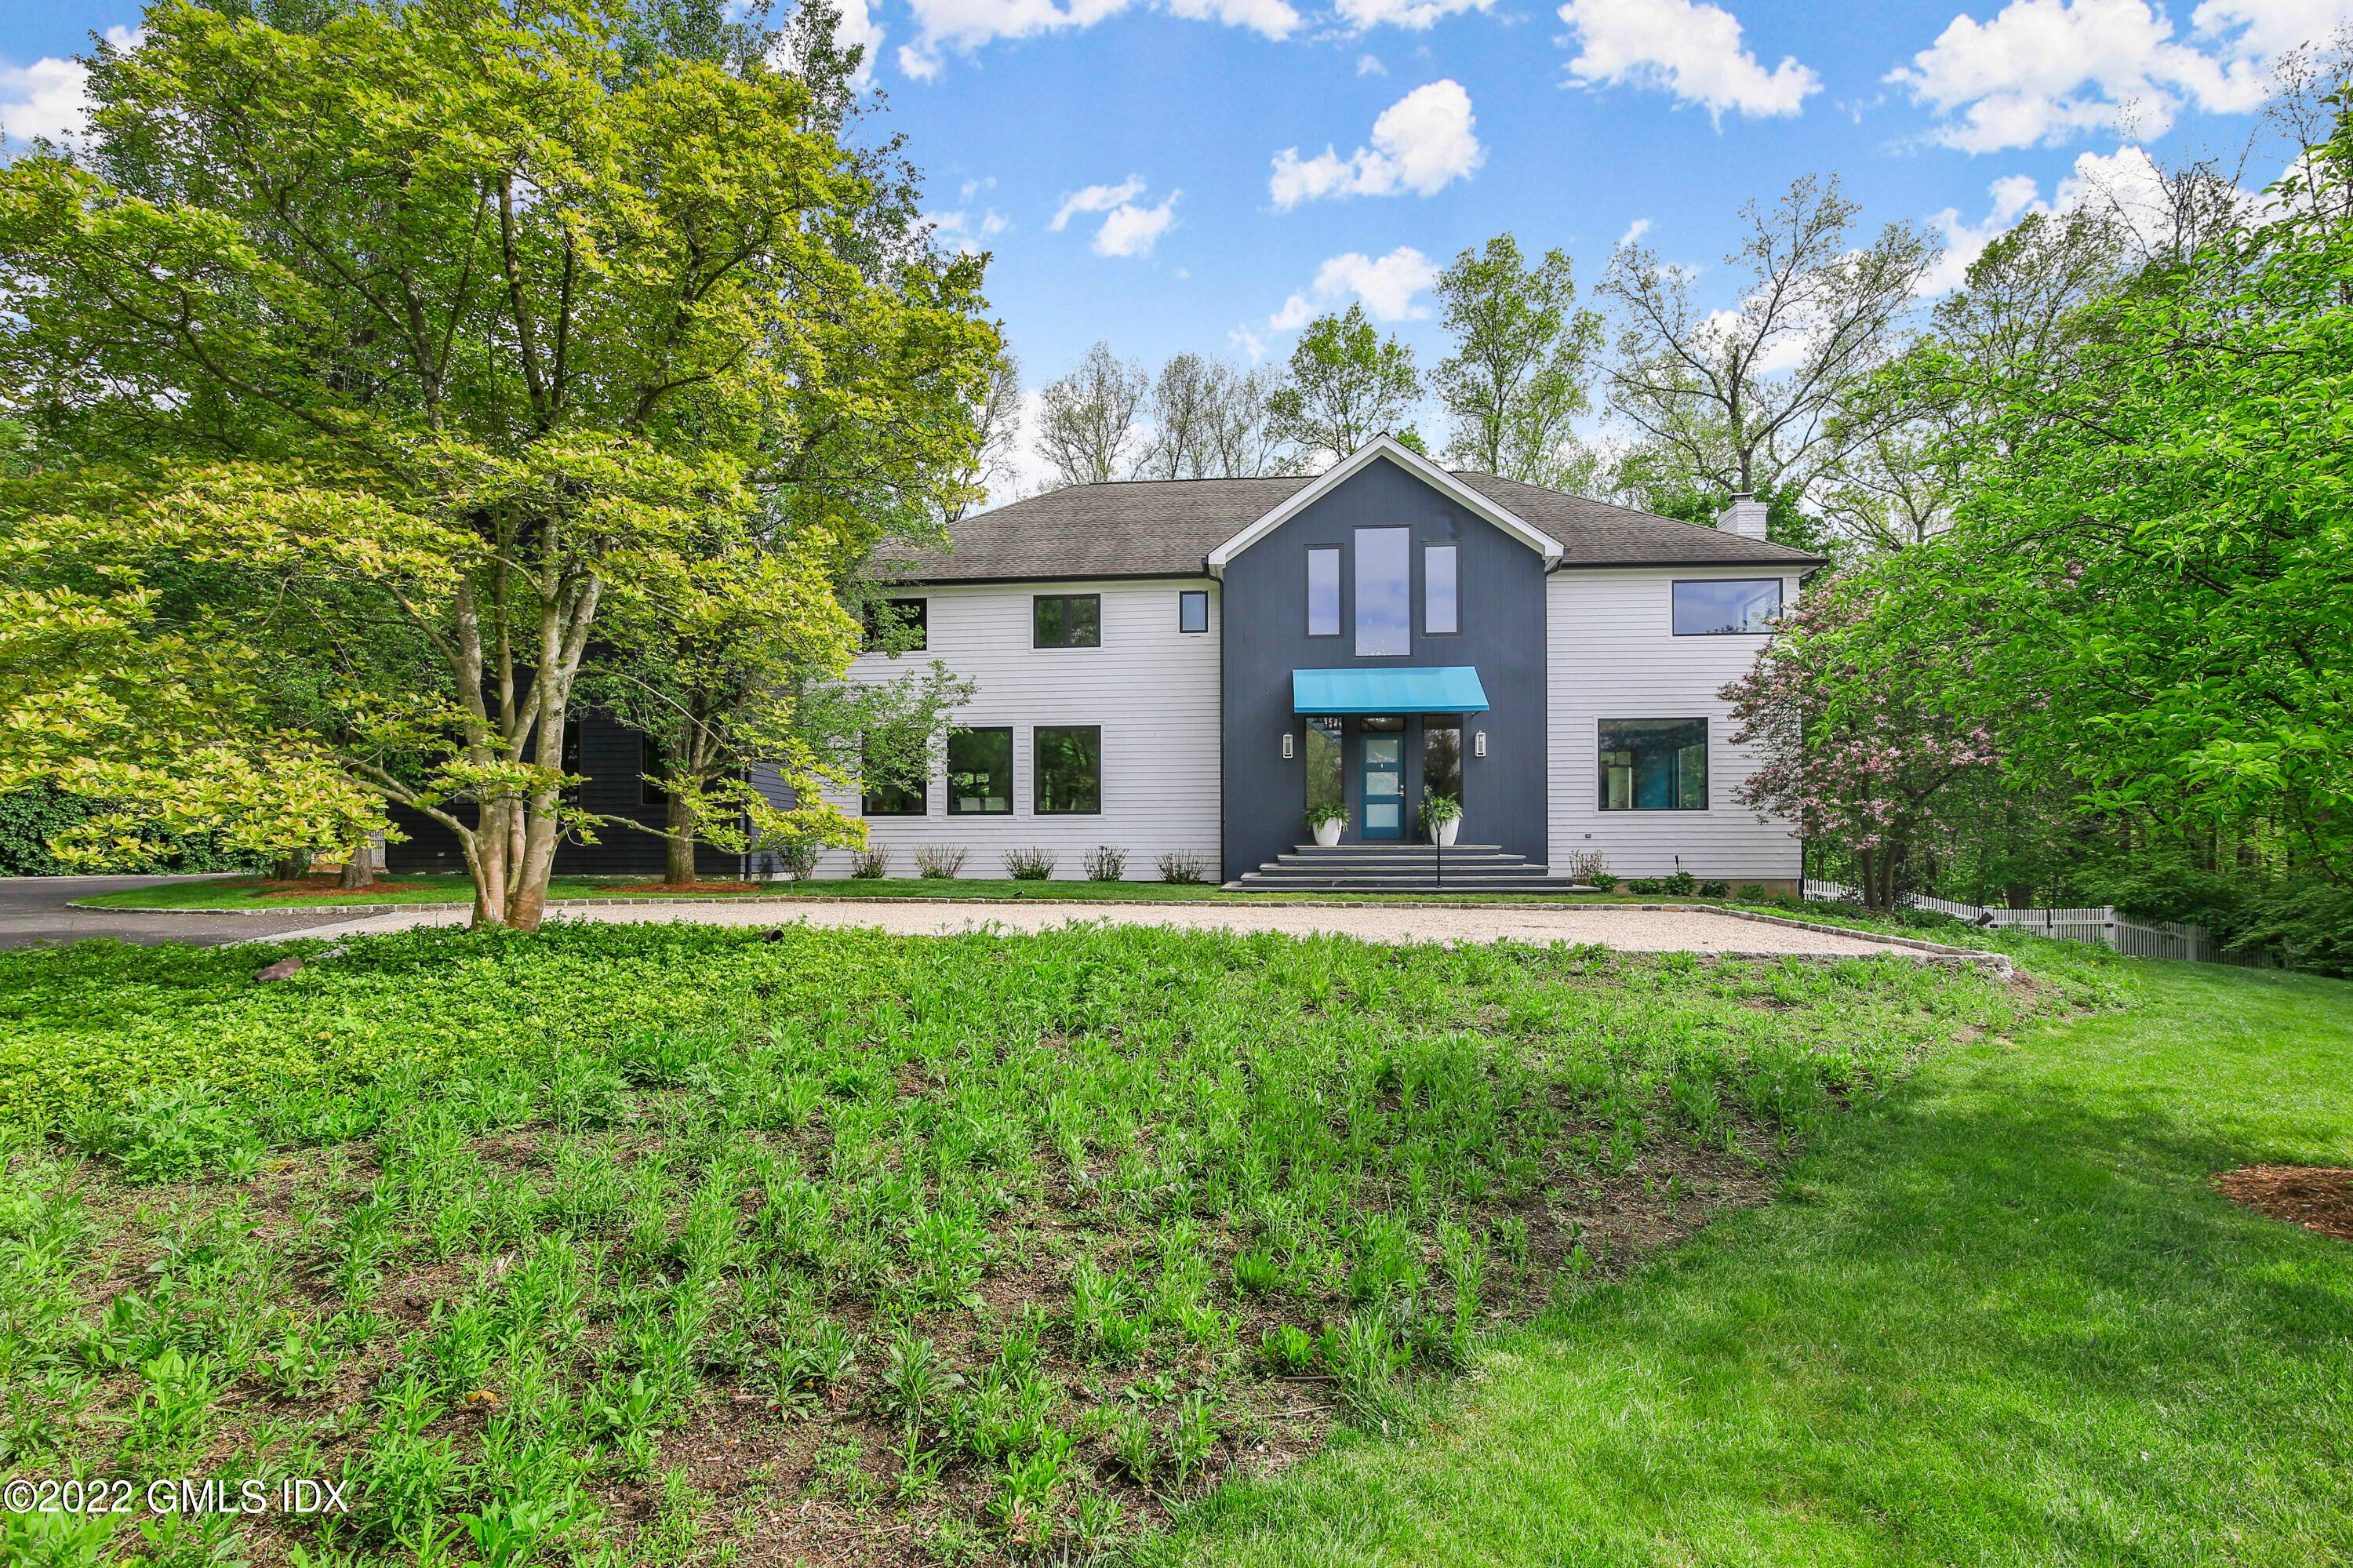 Set off a wide private lane bordered by truly magnificent grounds of adjoining great estates, this transformed five bedroom colonial is now a sleek and uniquely private retreat.